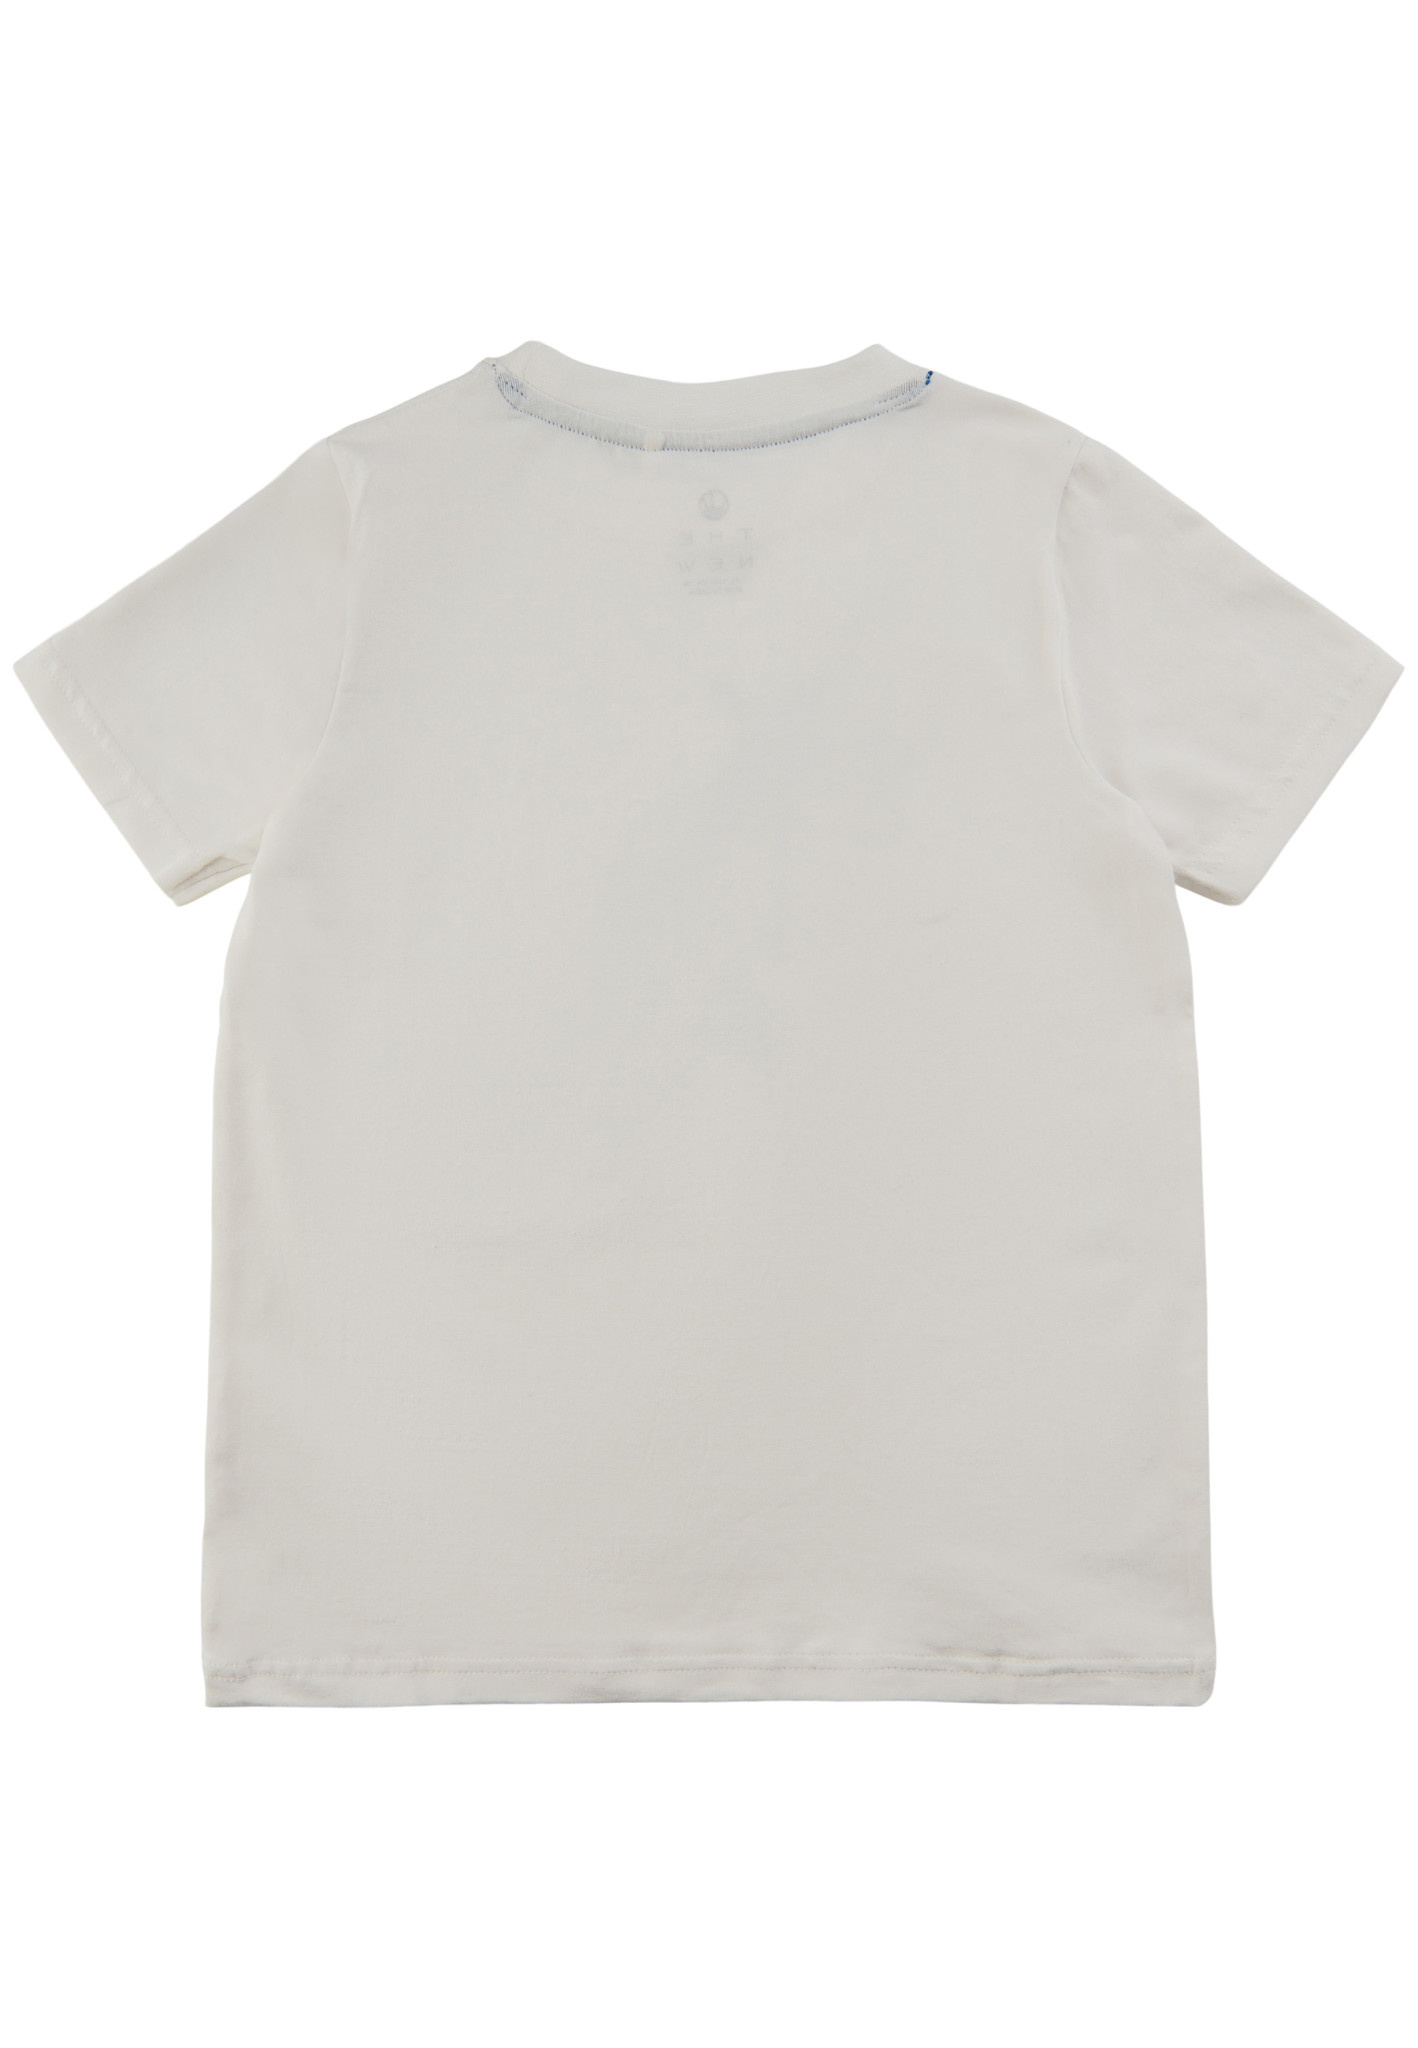 The New - Frank ss tee white swan-2